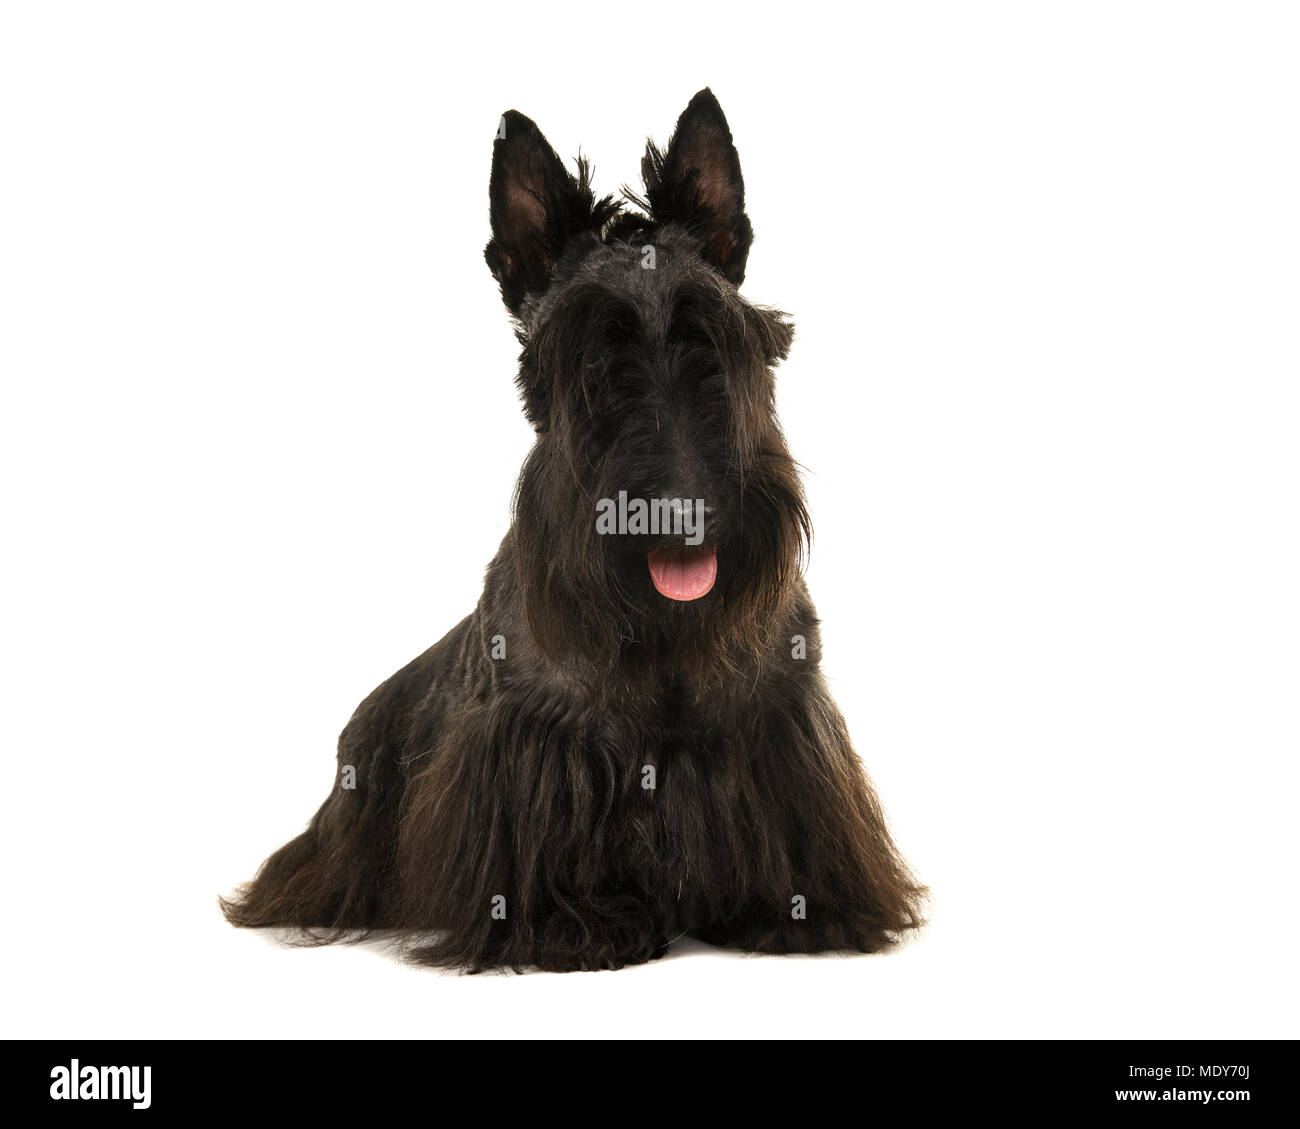 Black scottisch terrier dog looking at the camera with mouth open isolated on a white background Stock Photo